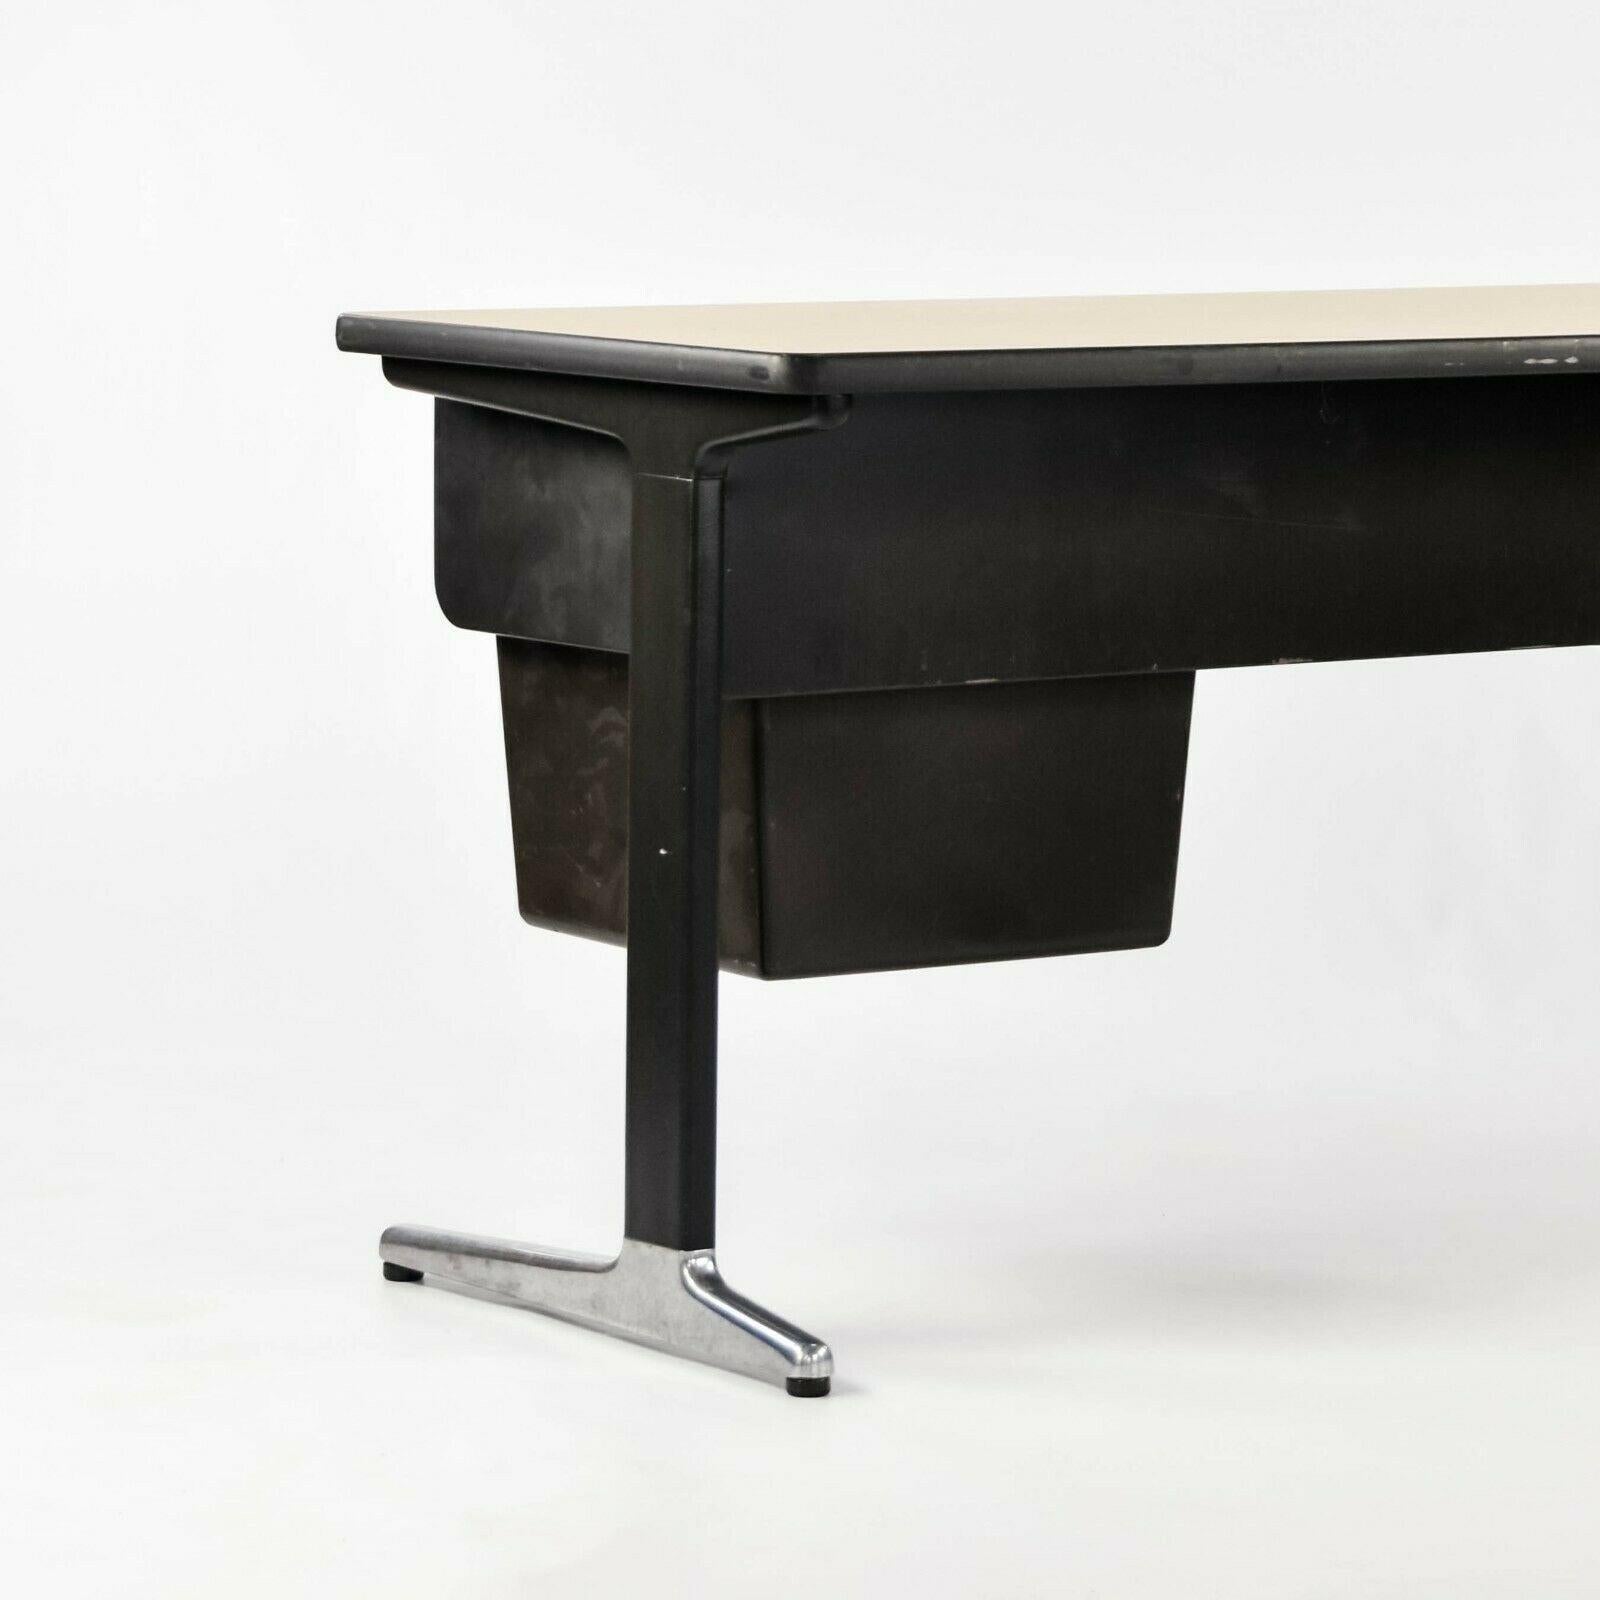 1970s 6ft George Nelson & Robert Probst Herman Miller Office Desk w/ Drawers In Good Condition For Sale In Philadelphia, PA